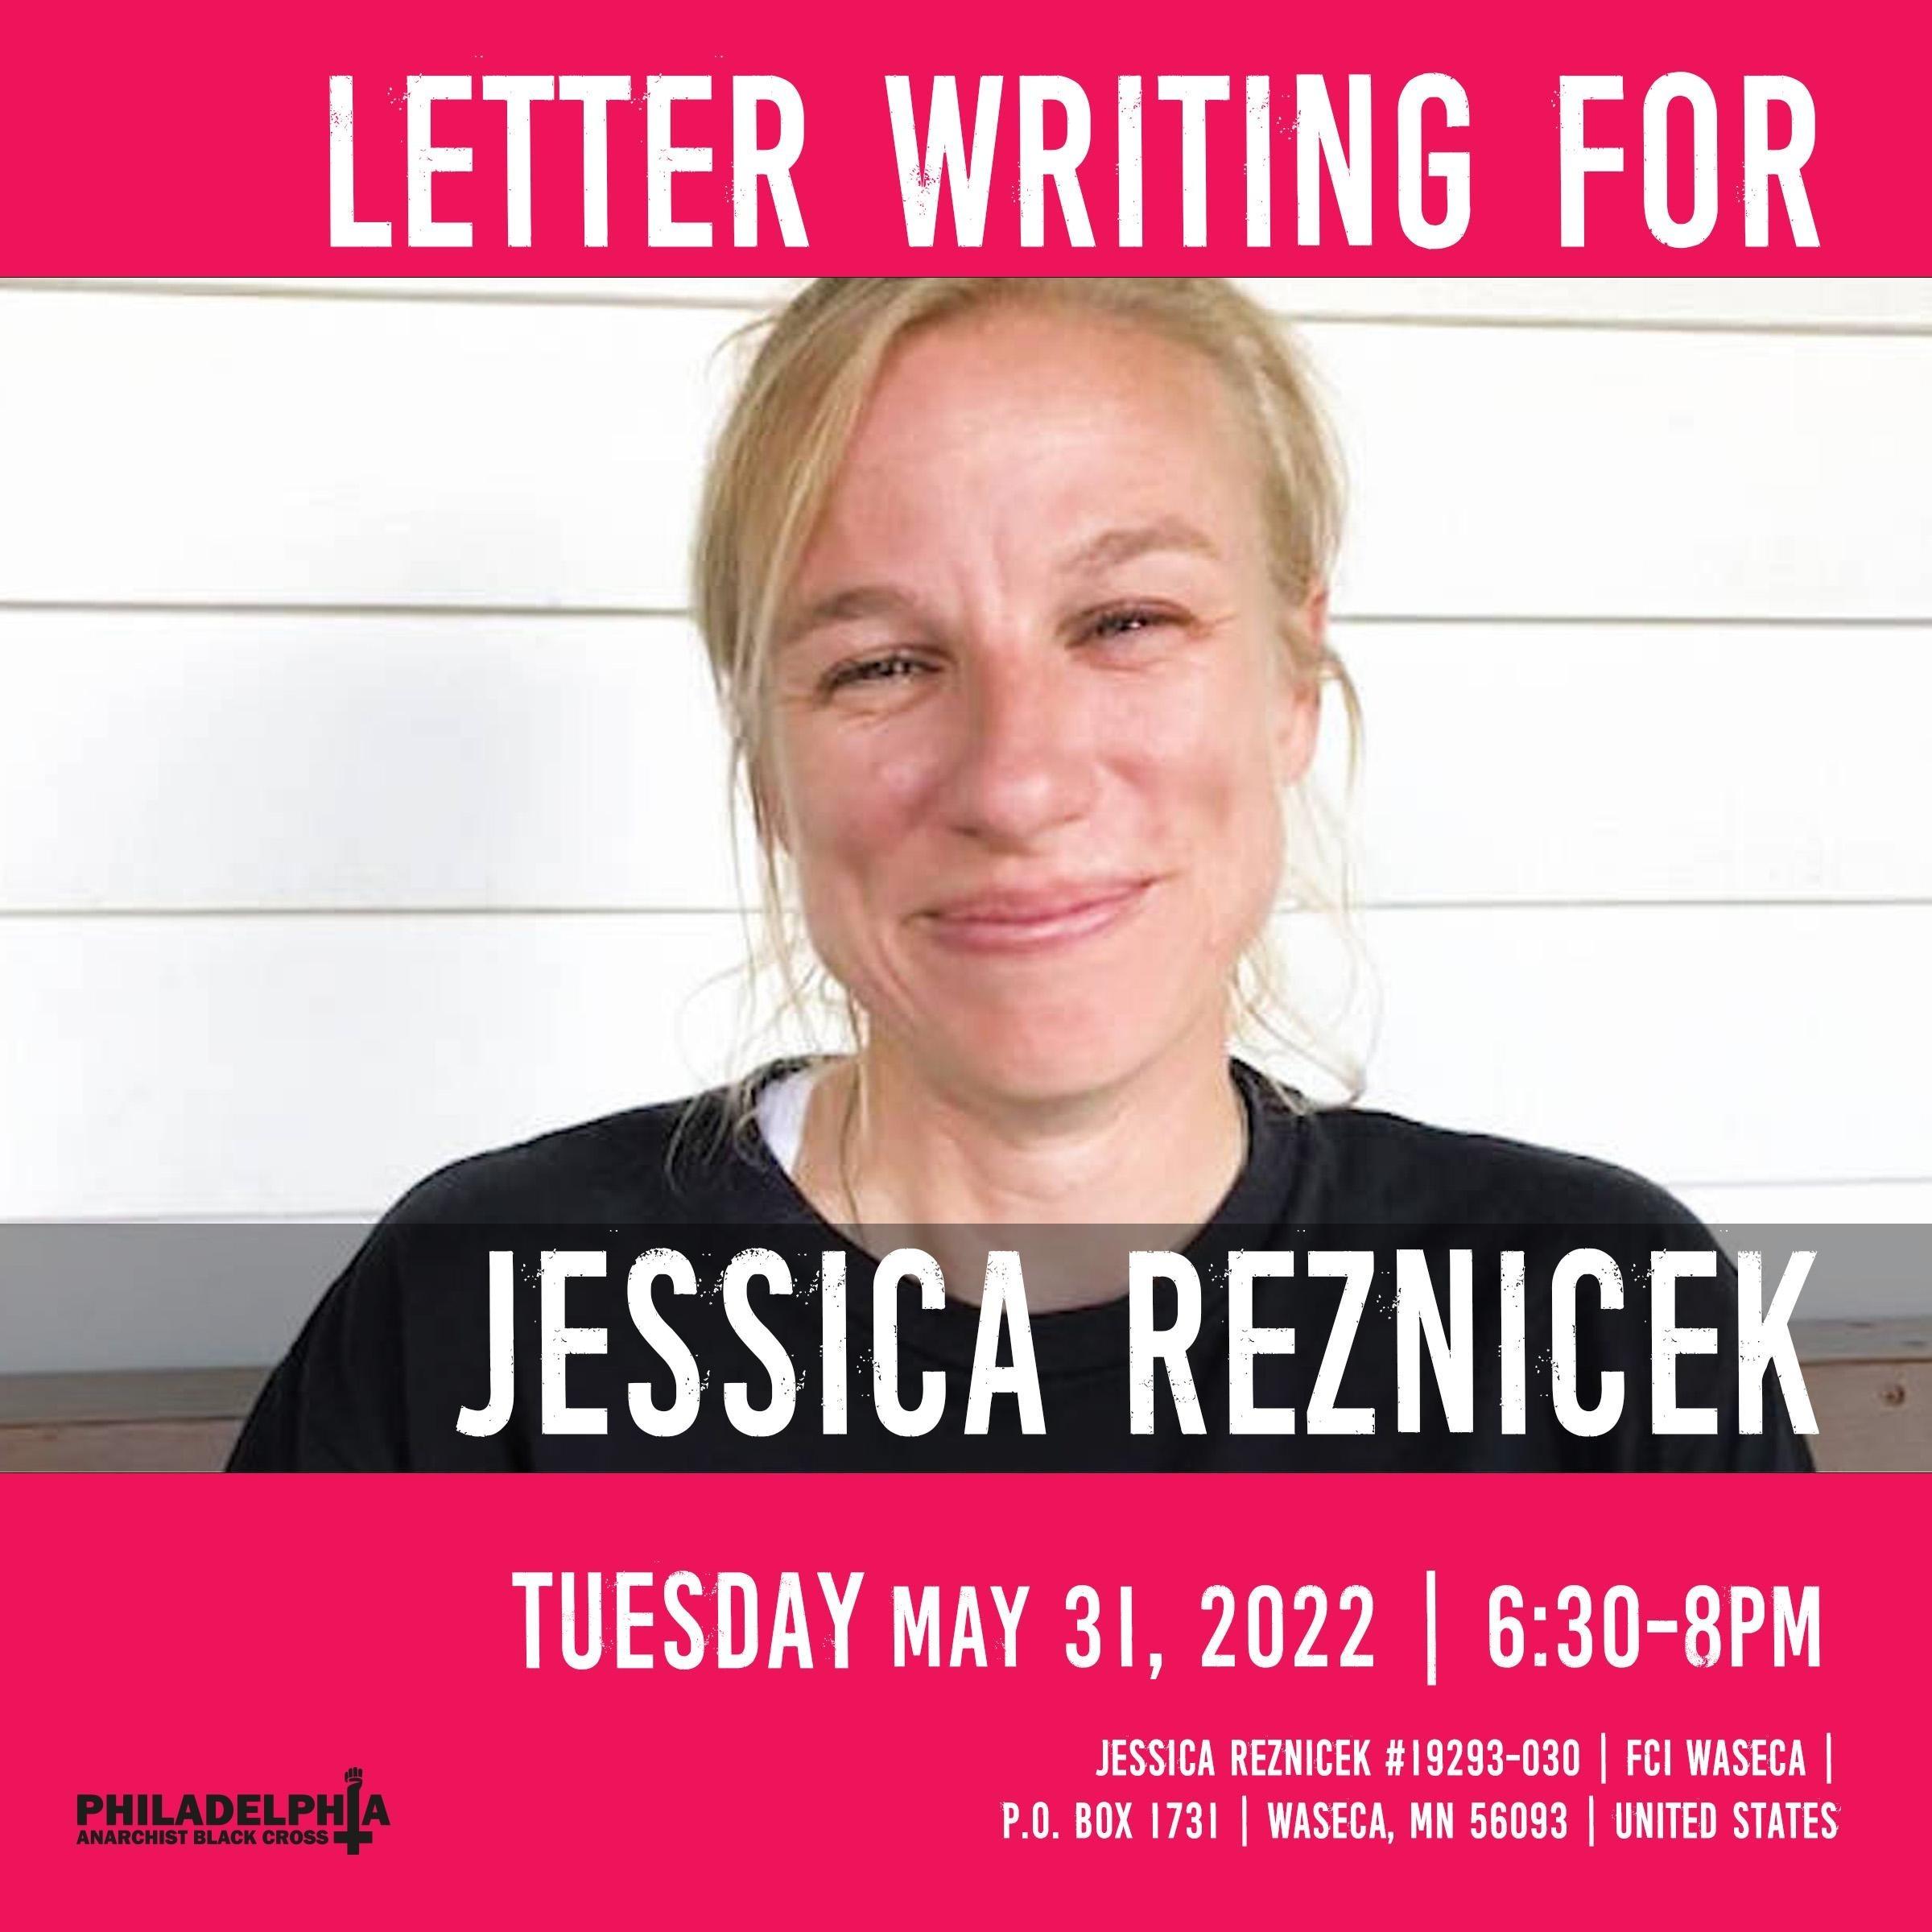 Tuesday May 31st: Letter-writing for Jessica Reznicek